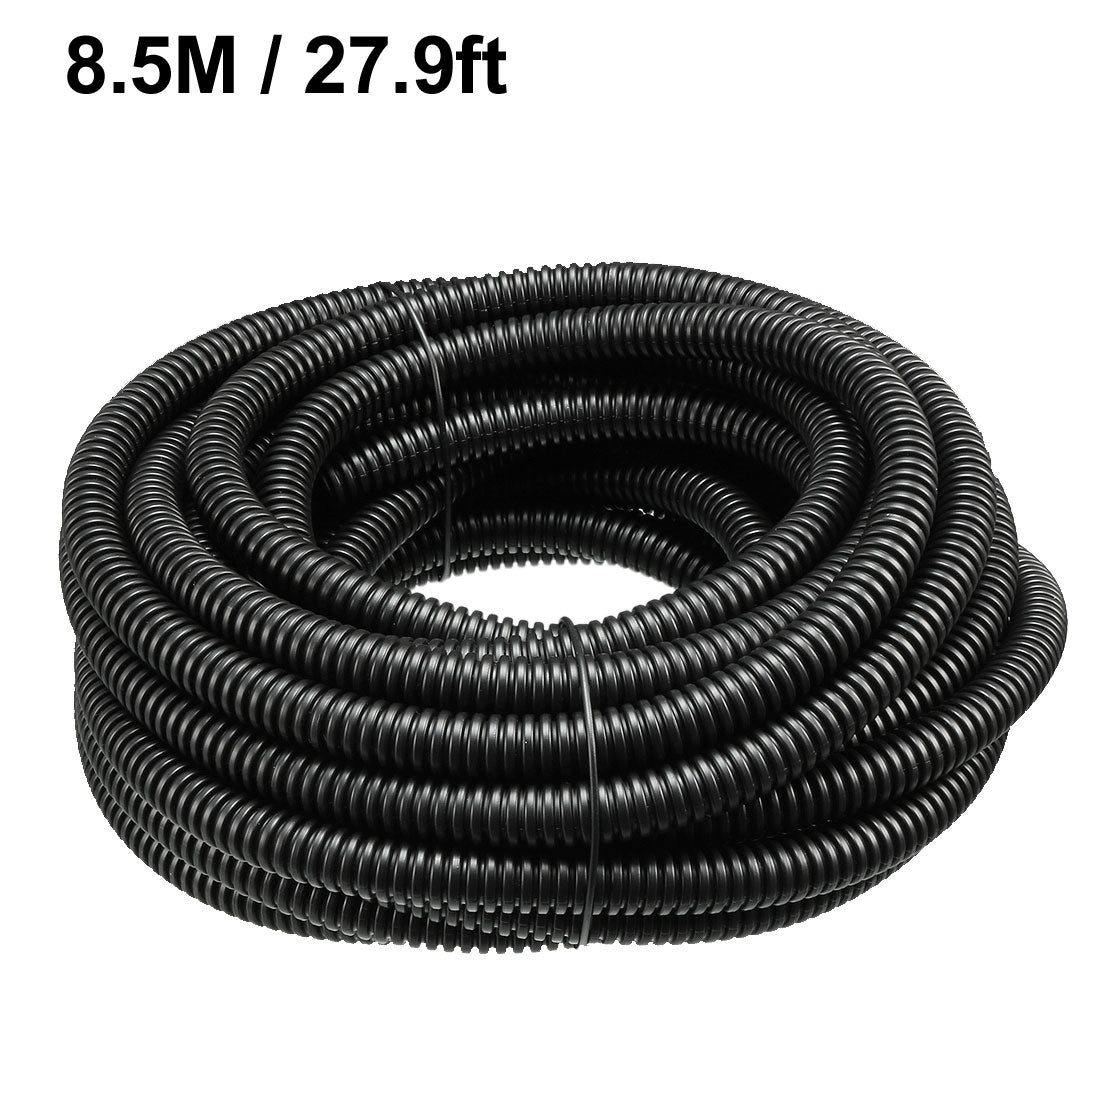 uxcell Uxcell 8.5 M 7.5 x 10.5 mm PP Flexible Corrugated Conduit Tube for Garden,Office Black